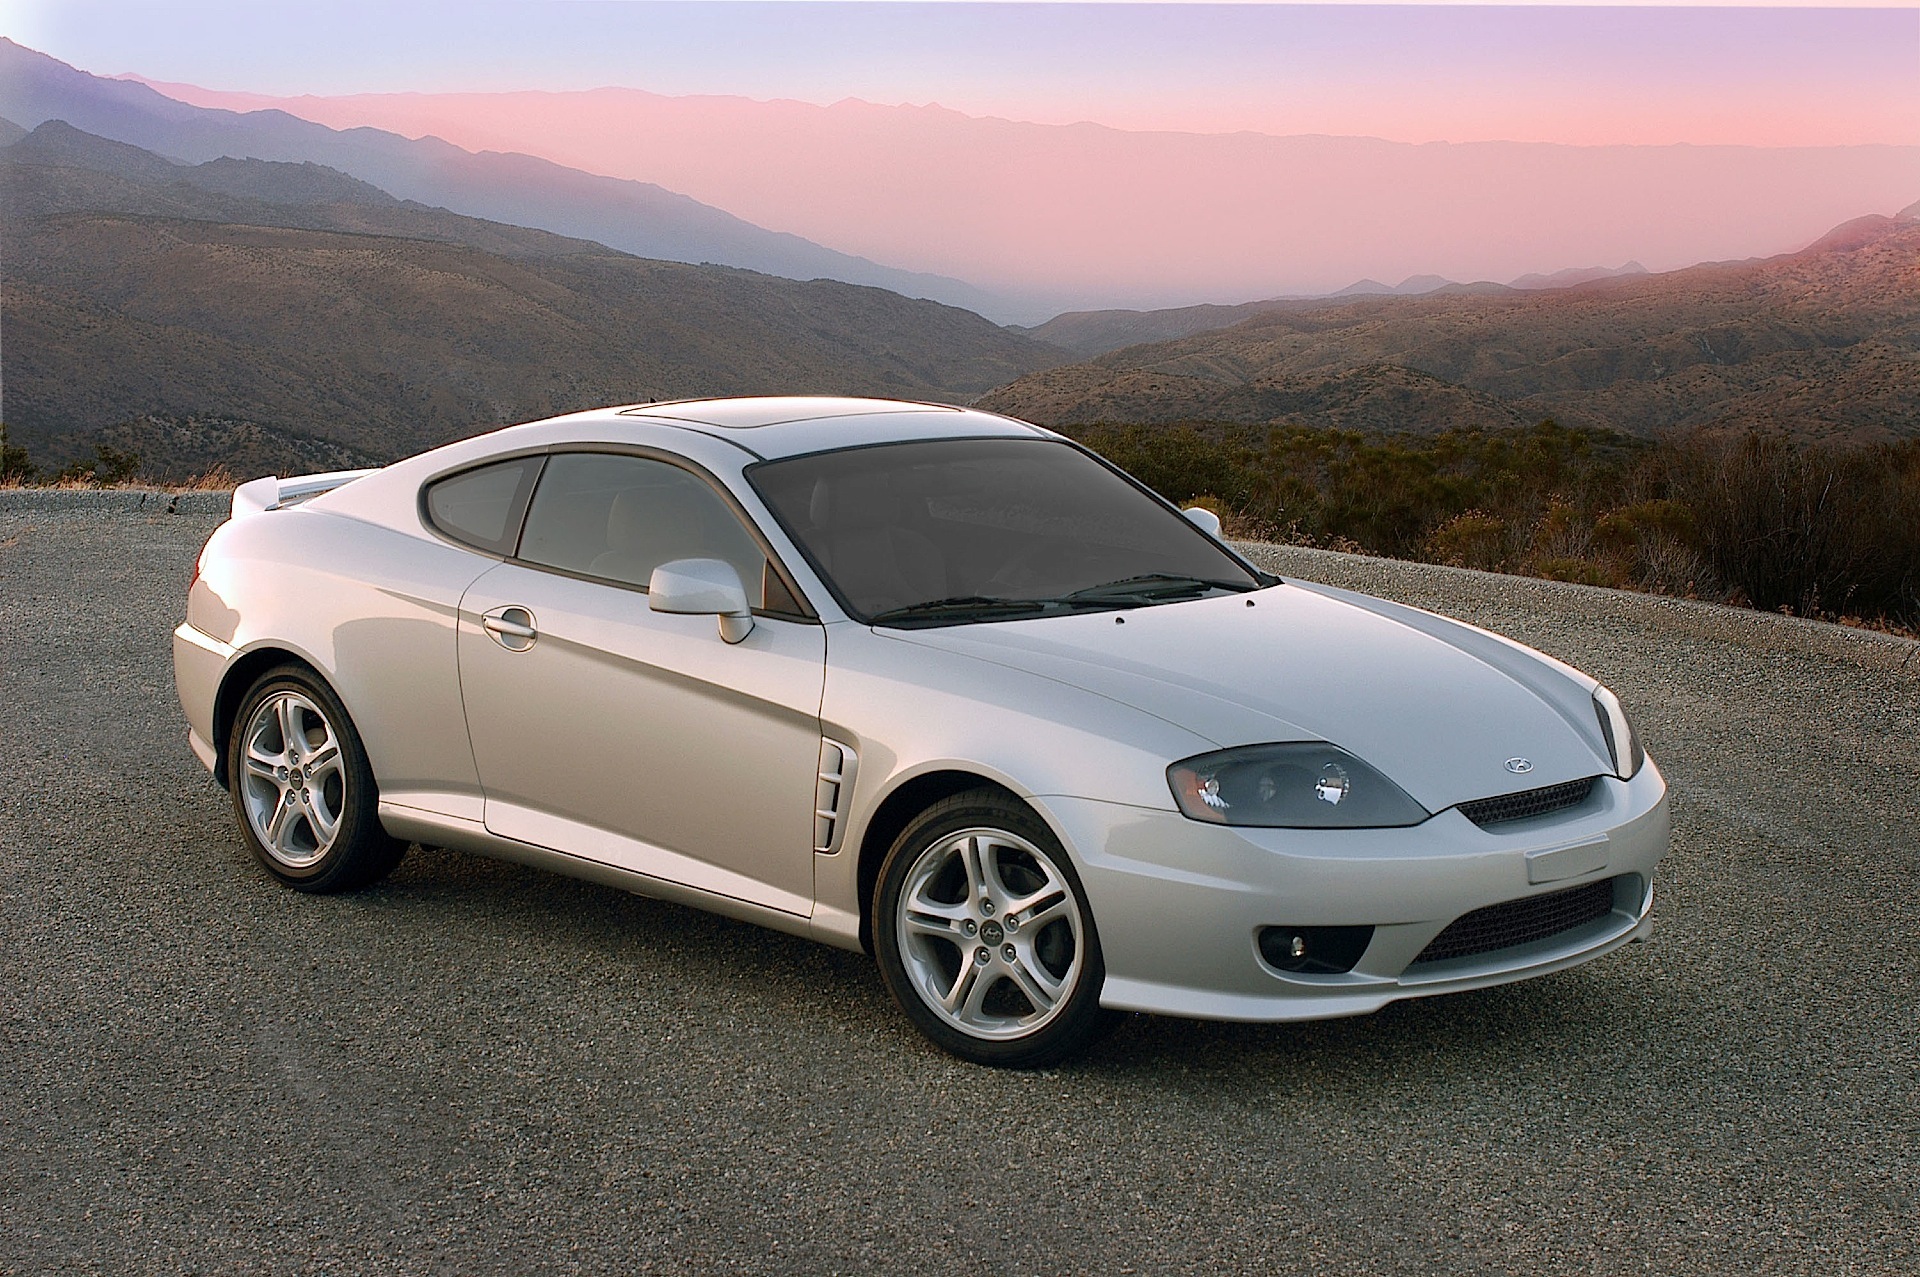 HQ Hyundai Coupe Wallpapers | File 918.73Kb